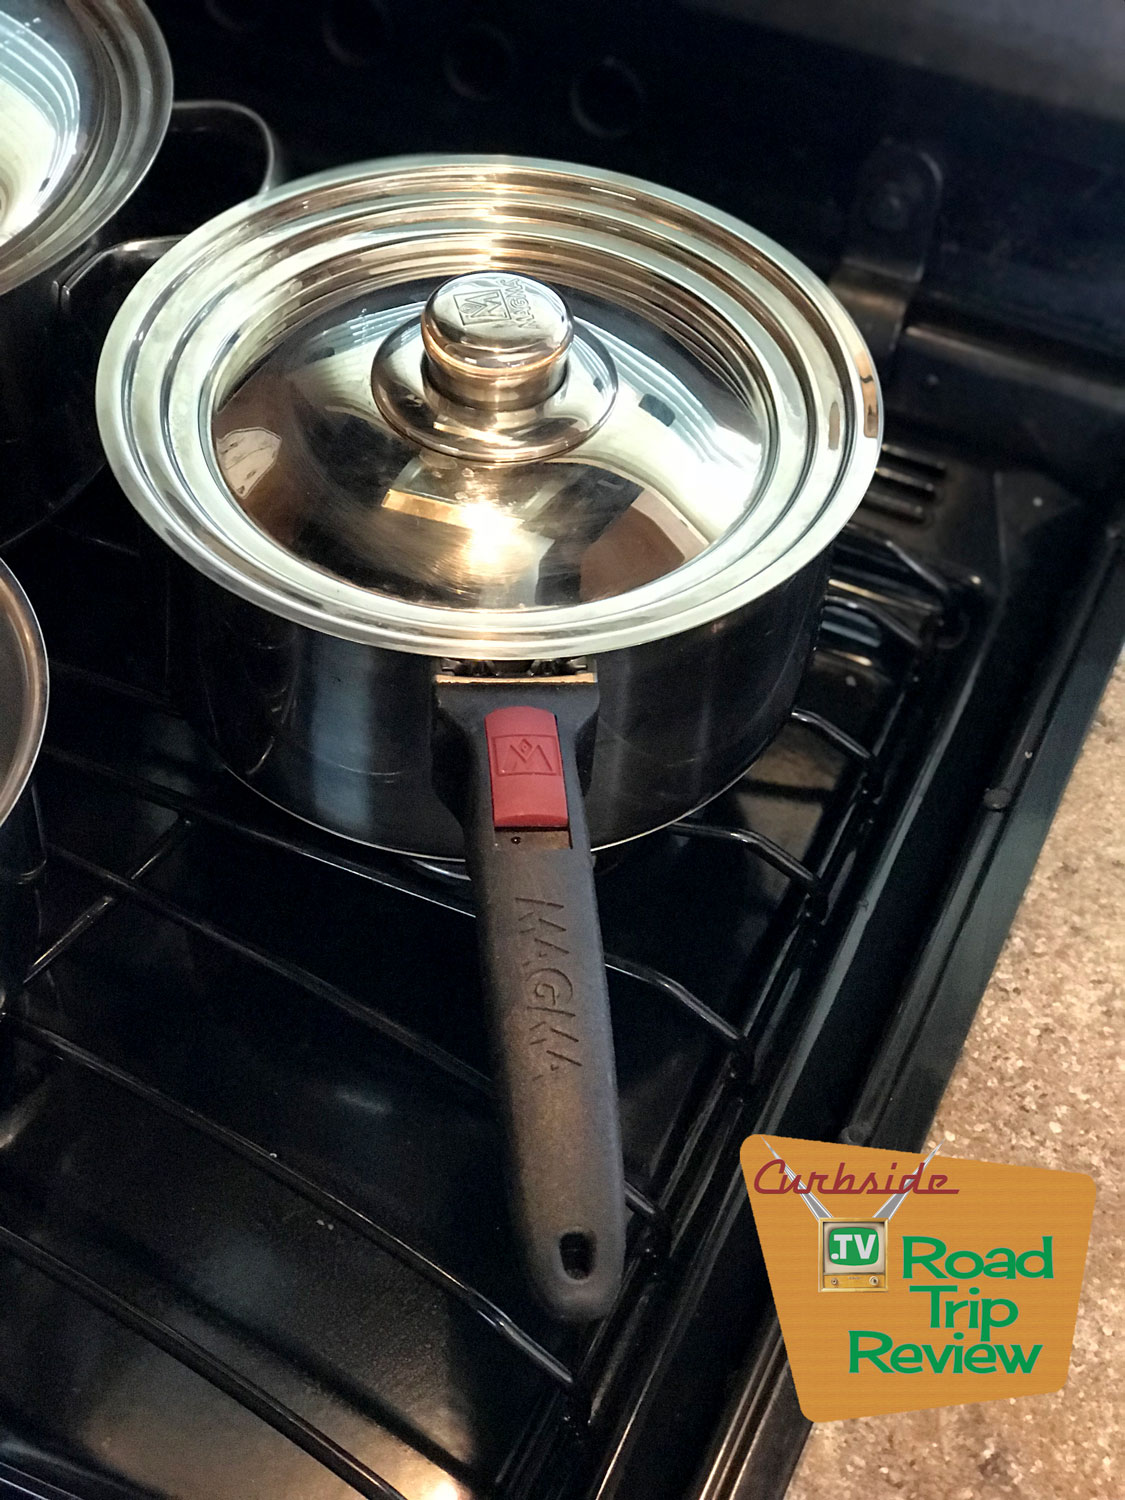 What is the best cookware for RVs that is also high in quality but